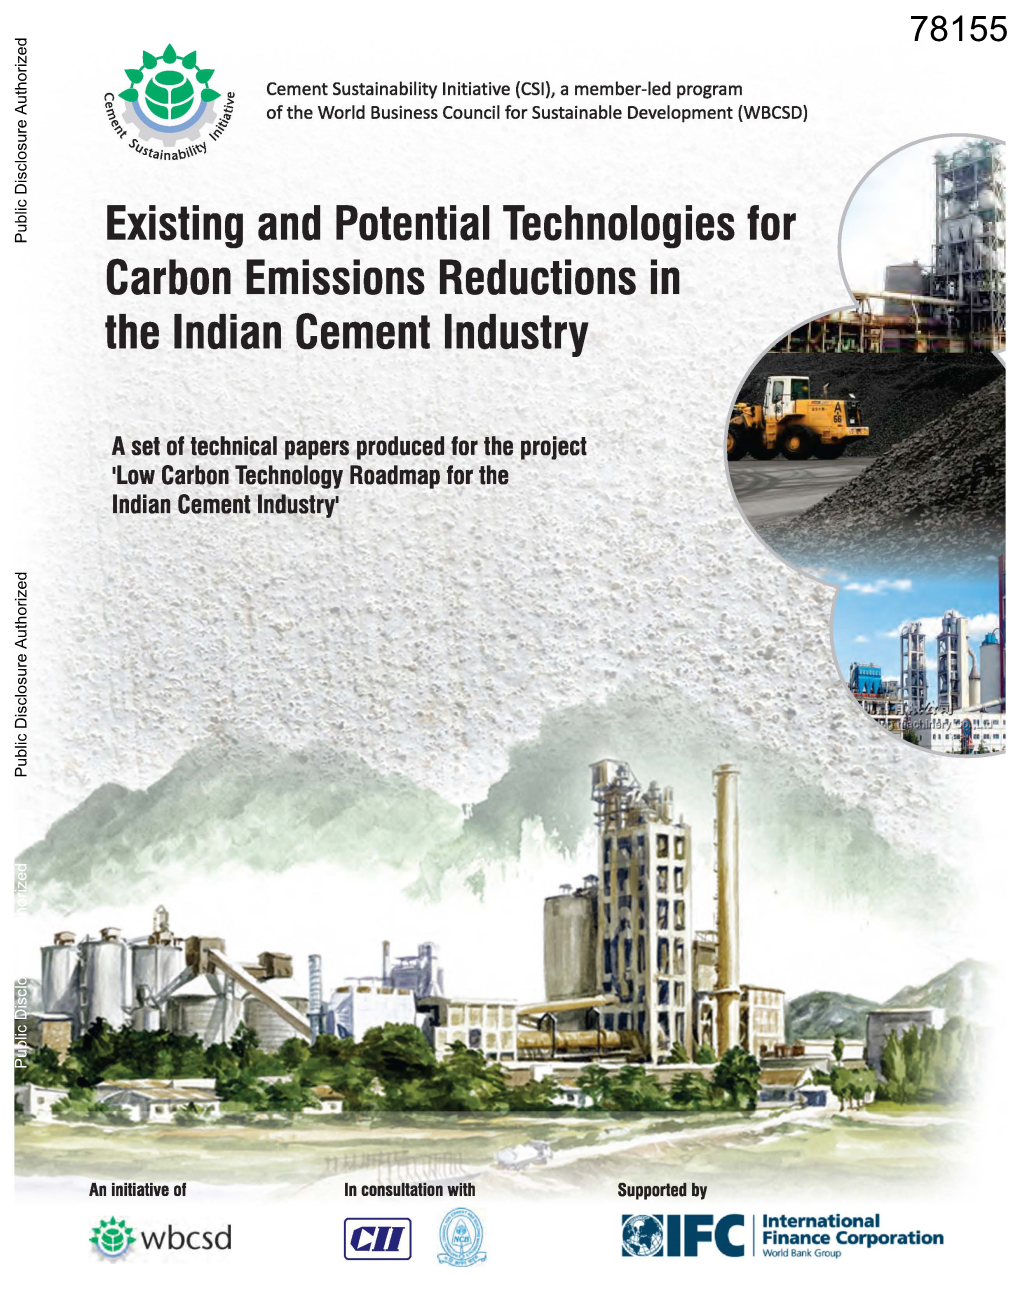 Existing and Potential Technologies for Carbon Emissions Reductions in the Indian Cement Industry